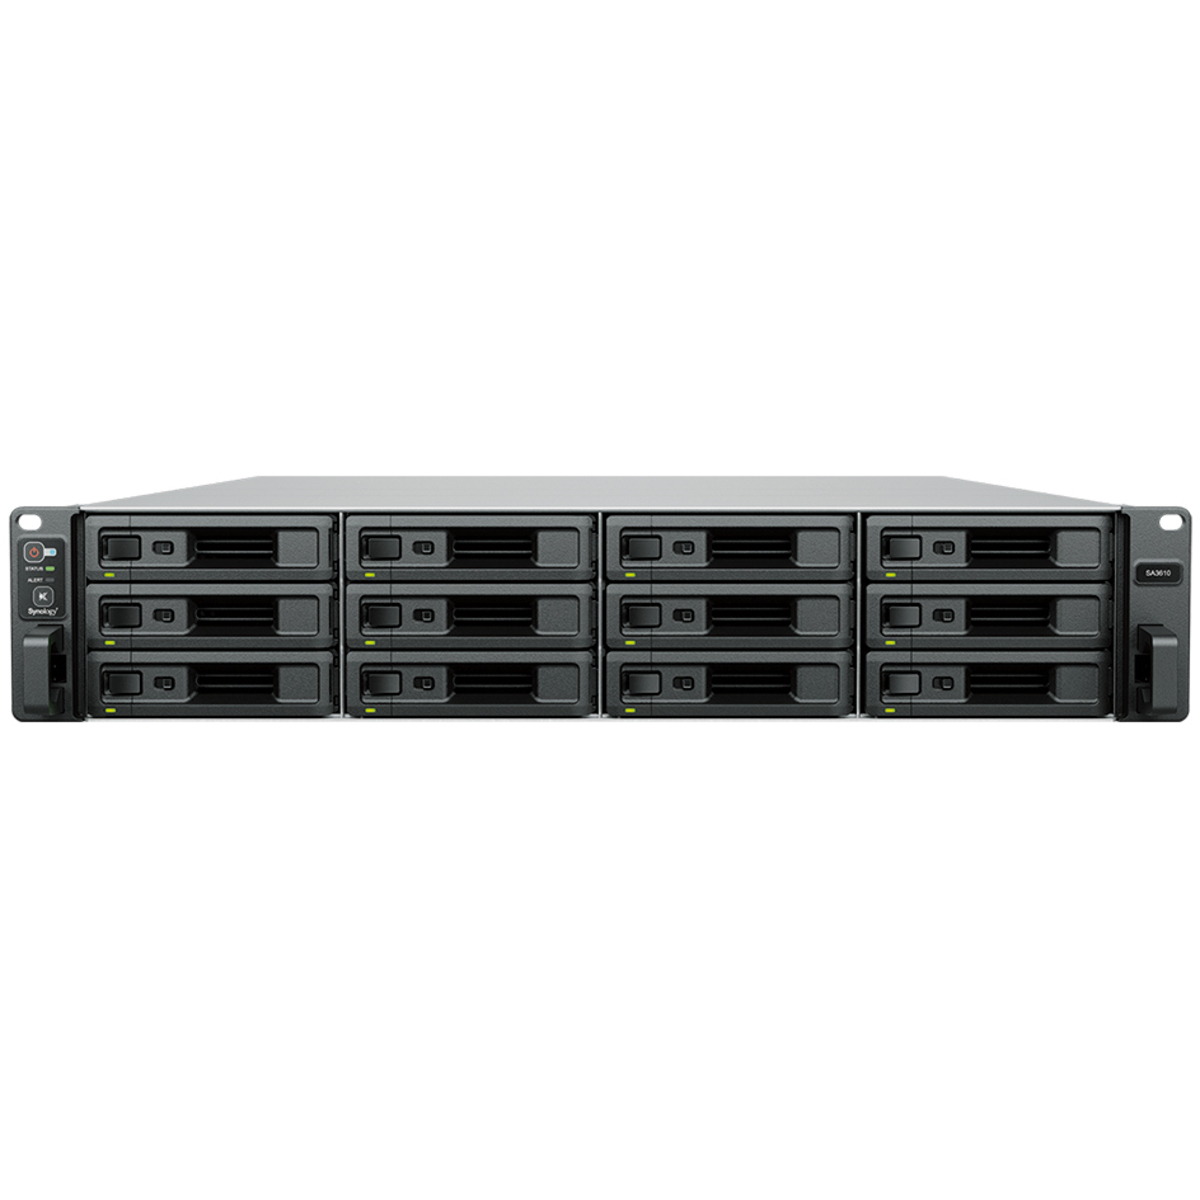 Synology RackStation SA3410 48tb 12-Bay RackMount Large Business / Enterprise NAS - Network Attached Storage Device 12x4tb Synology HAT5300 Series HAT5300-4T 3.5 7200rpm SATA 6Gb/s HDD ENTERPRISE Class Drives Installed - Burn-In Tested RackStation SA3410